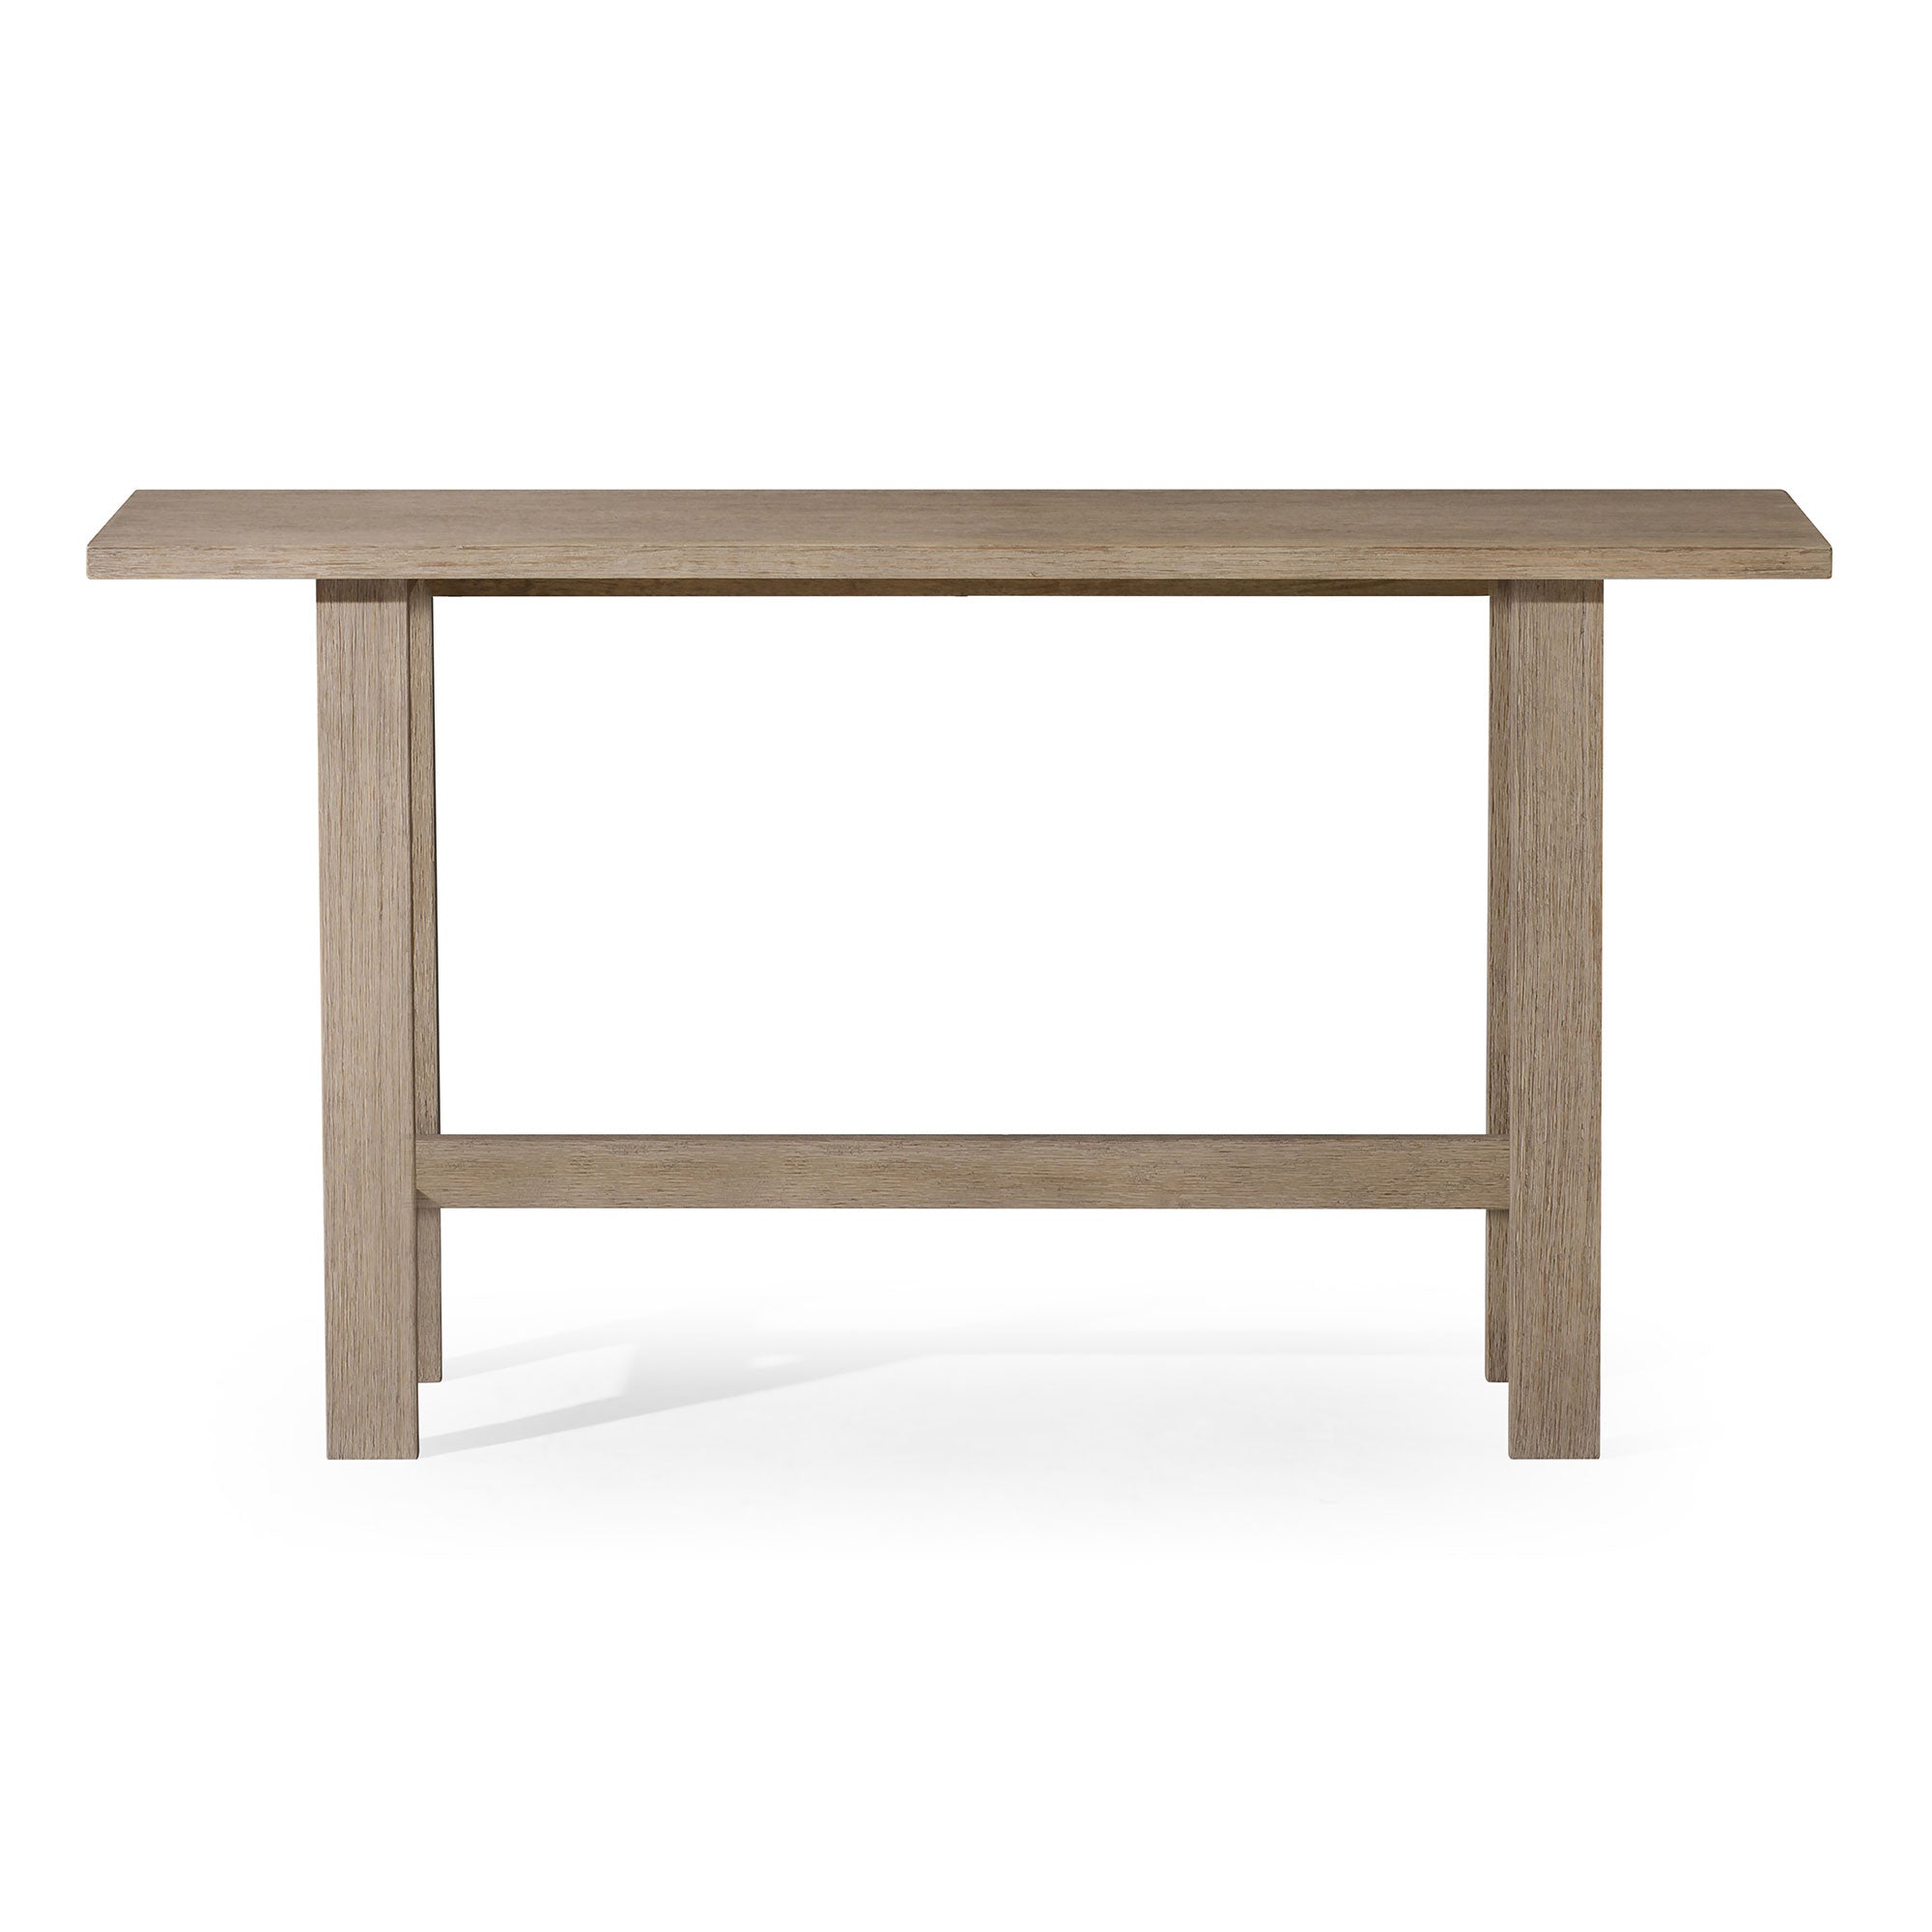 Hera Modern Wooden Console Table in Weathered Grey Finish